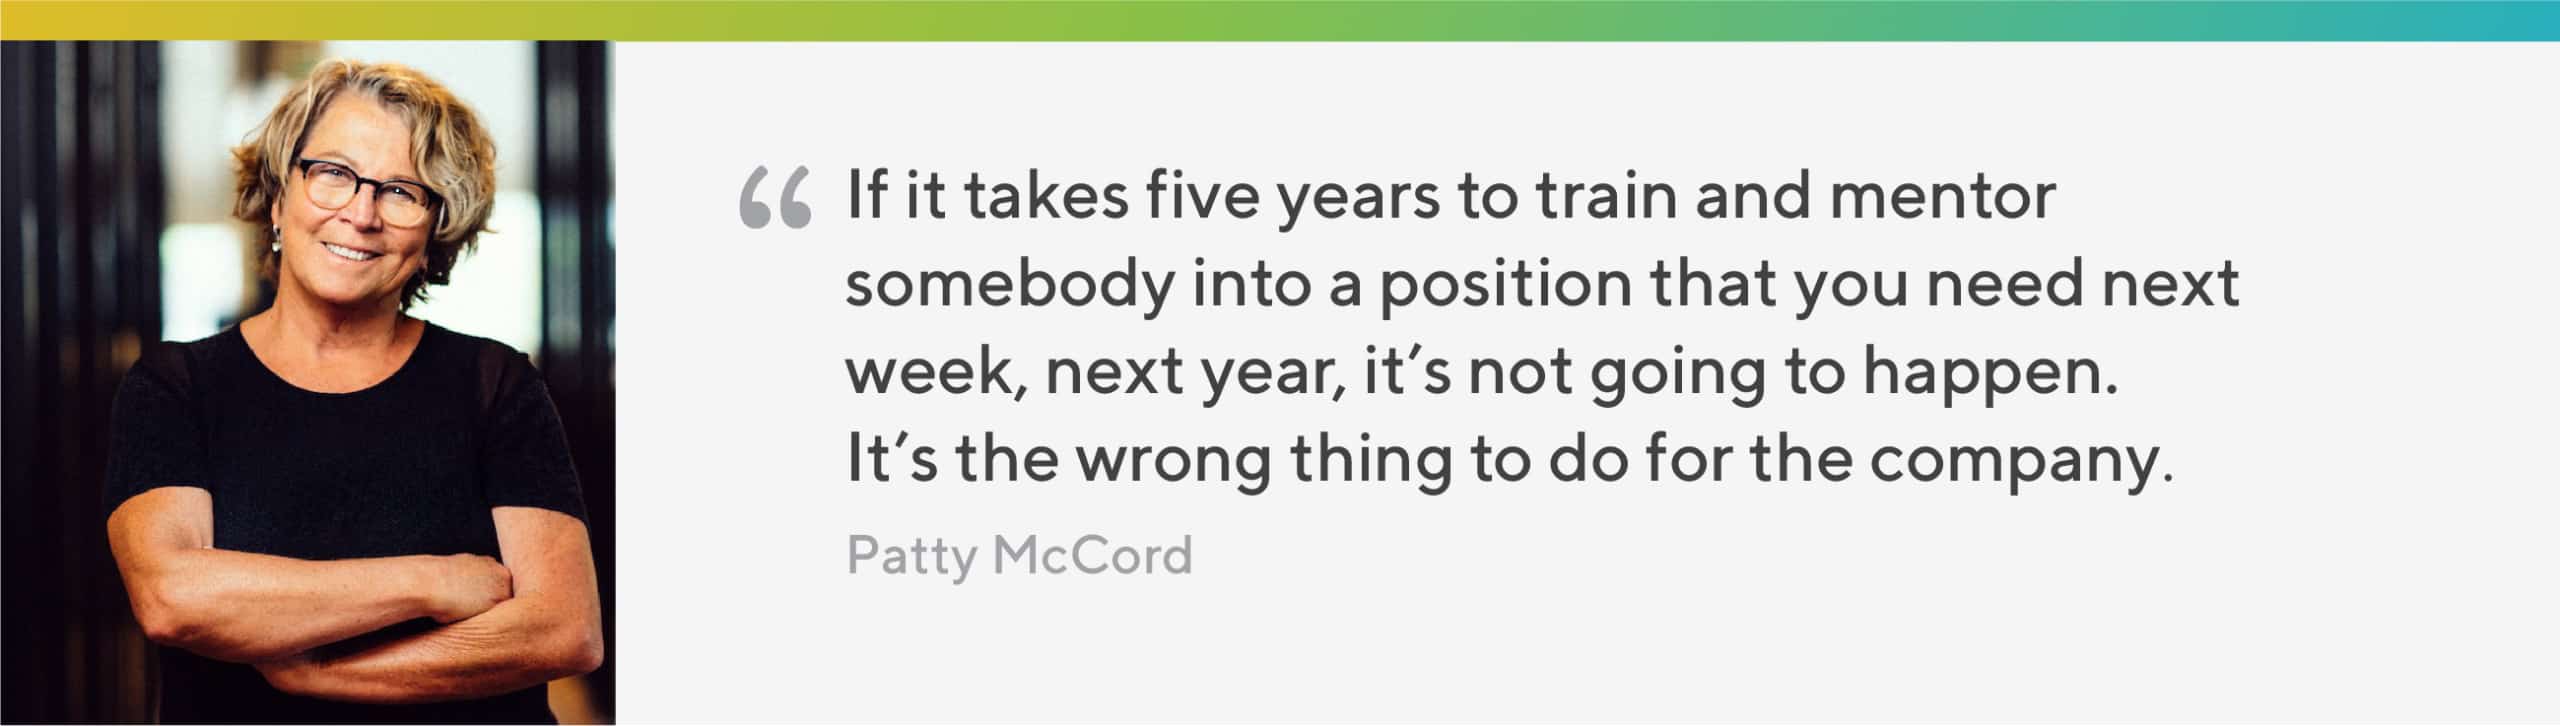 Patty McCord On Mentoring Talent